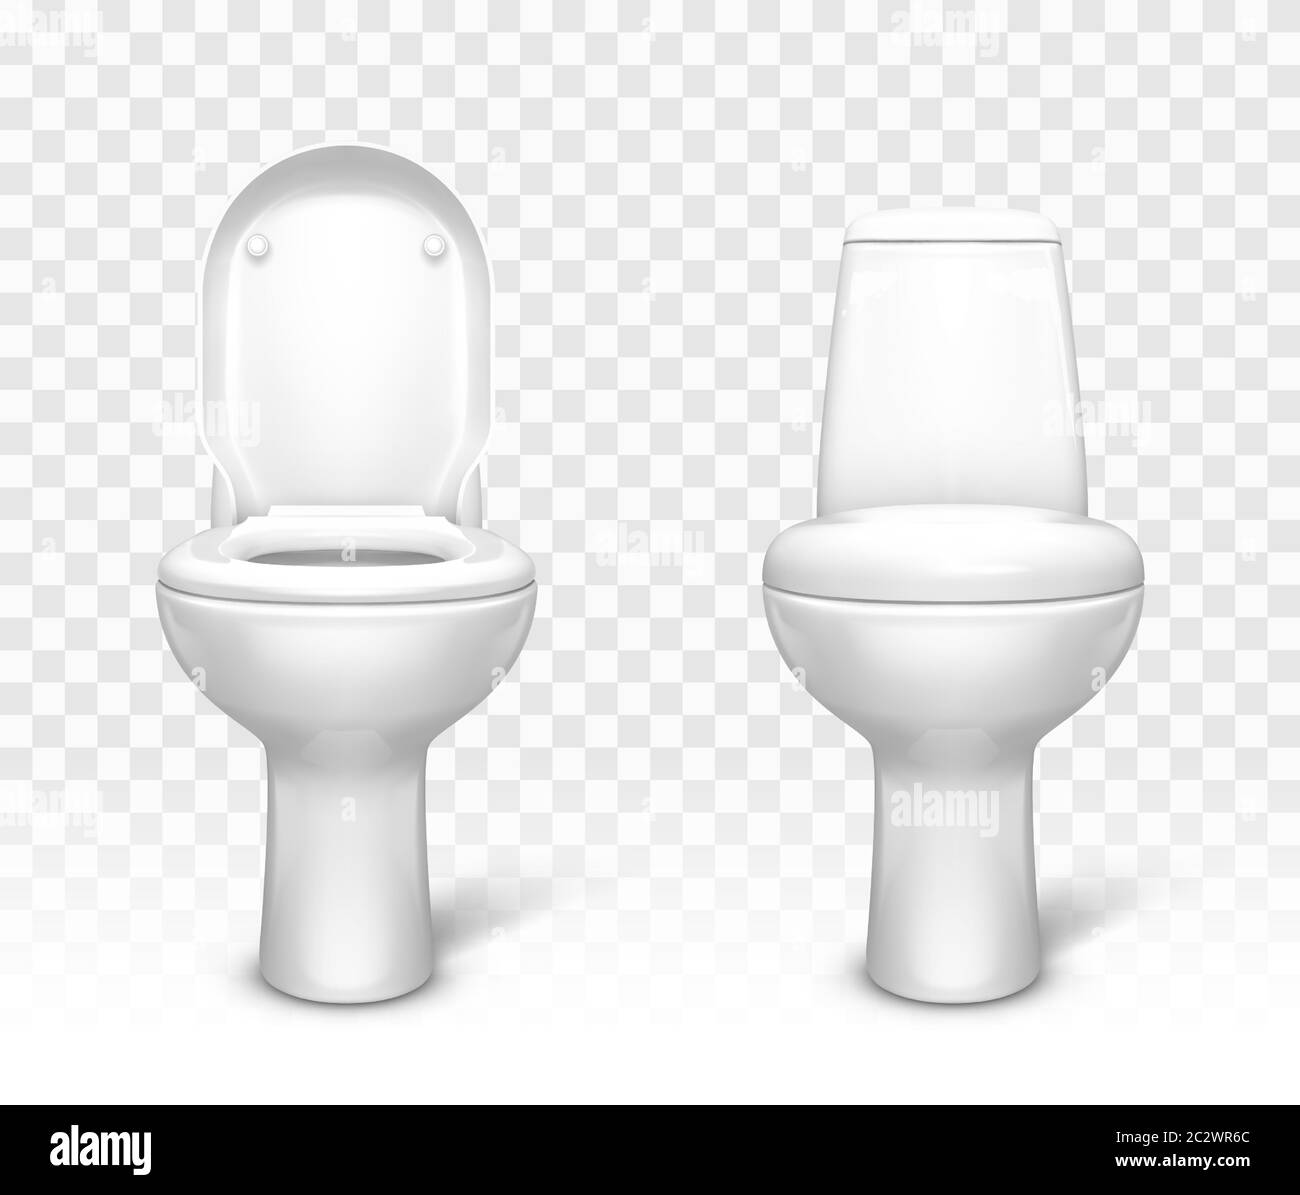 Toilet with seat set. White ceramic lavatory bowl with closed and open lid front view mockup template for interior design isolated on transparent back Stock Vector